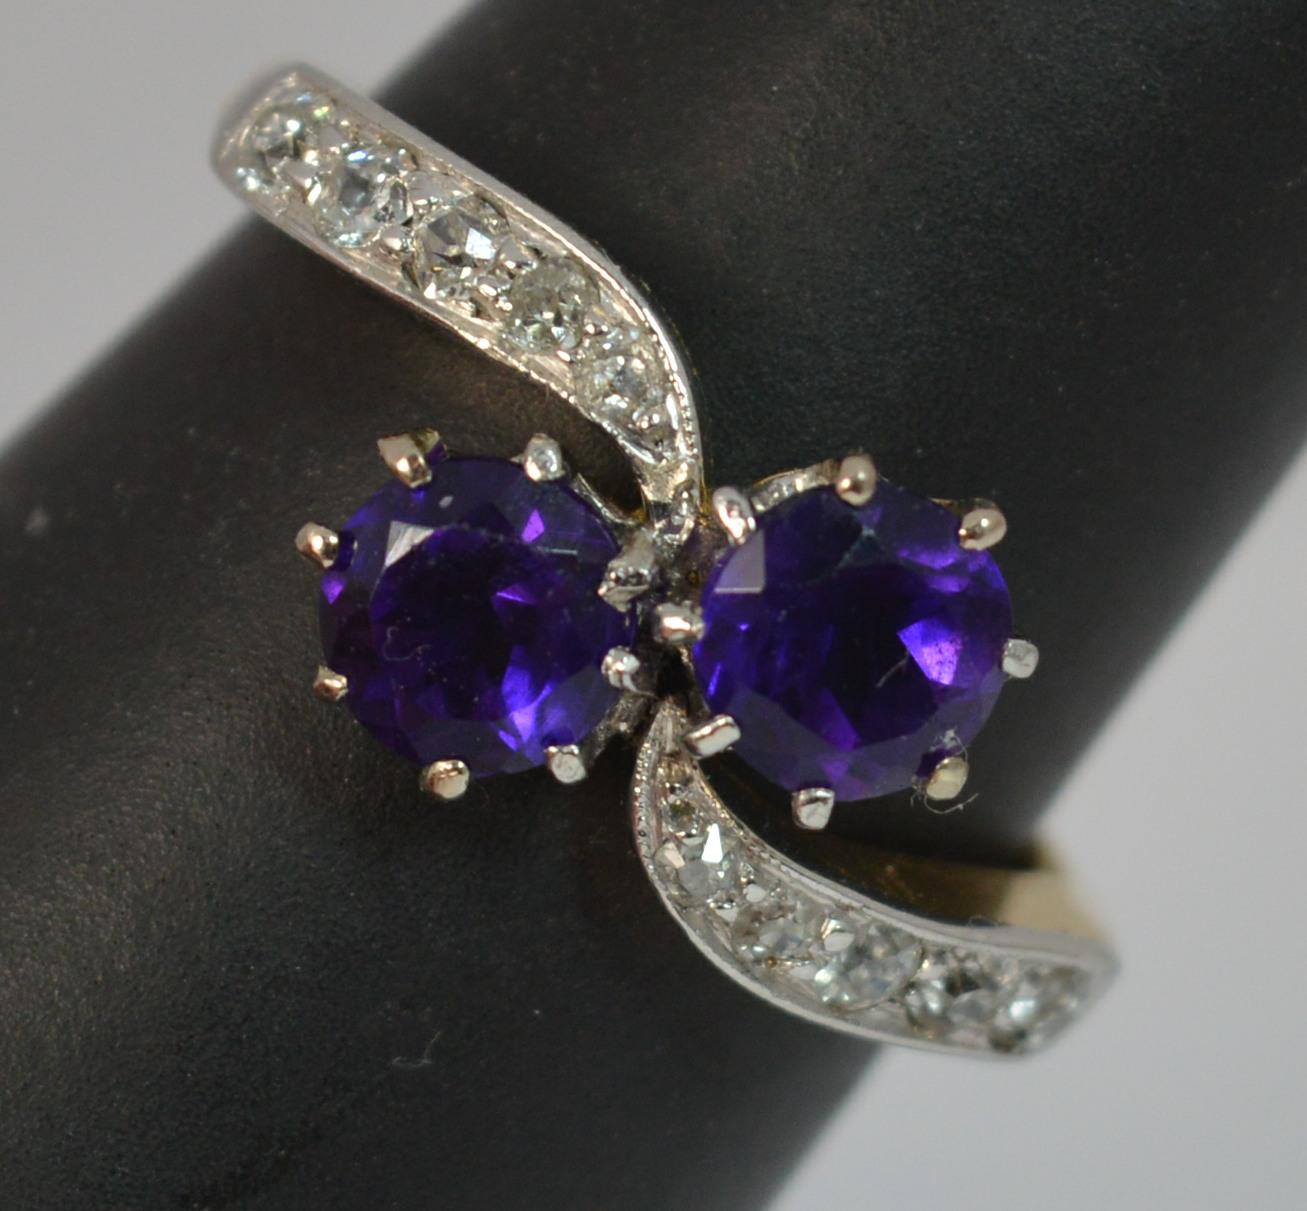 Antique 18 Carat Gold and Platinum Amethyst Toi et Moi Ring with Diamonds 5